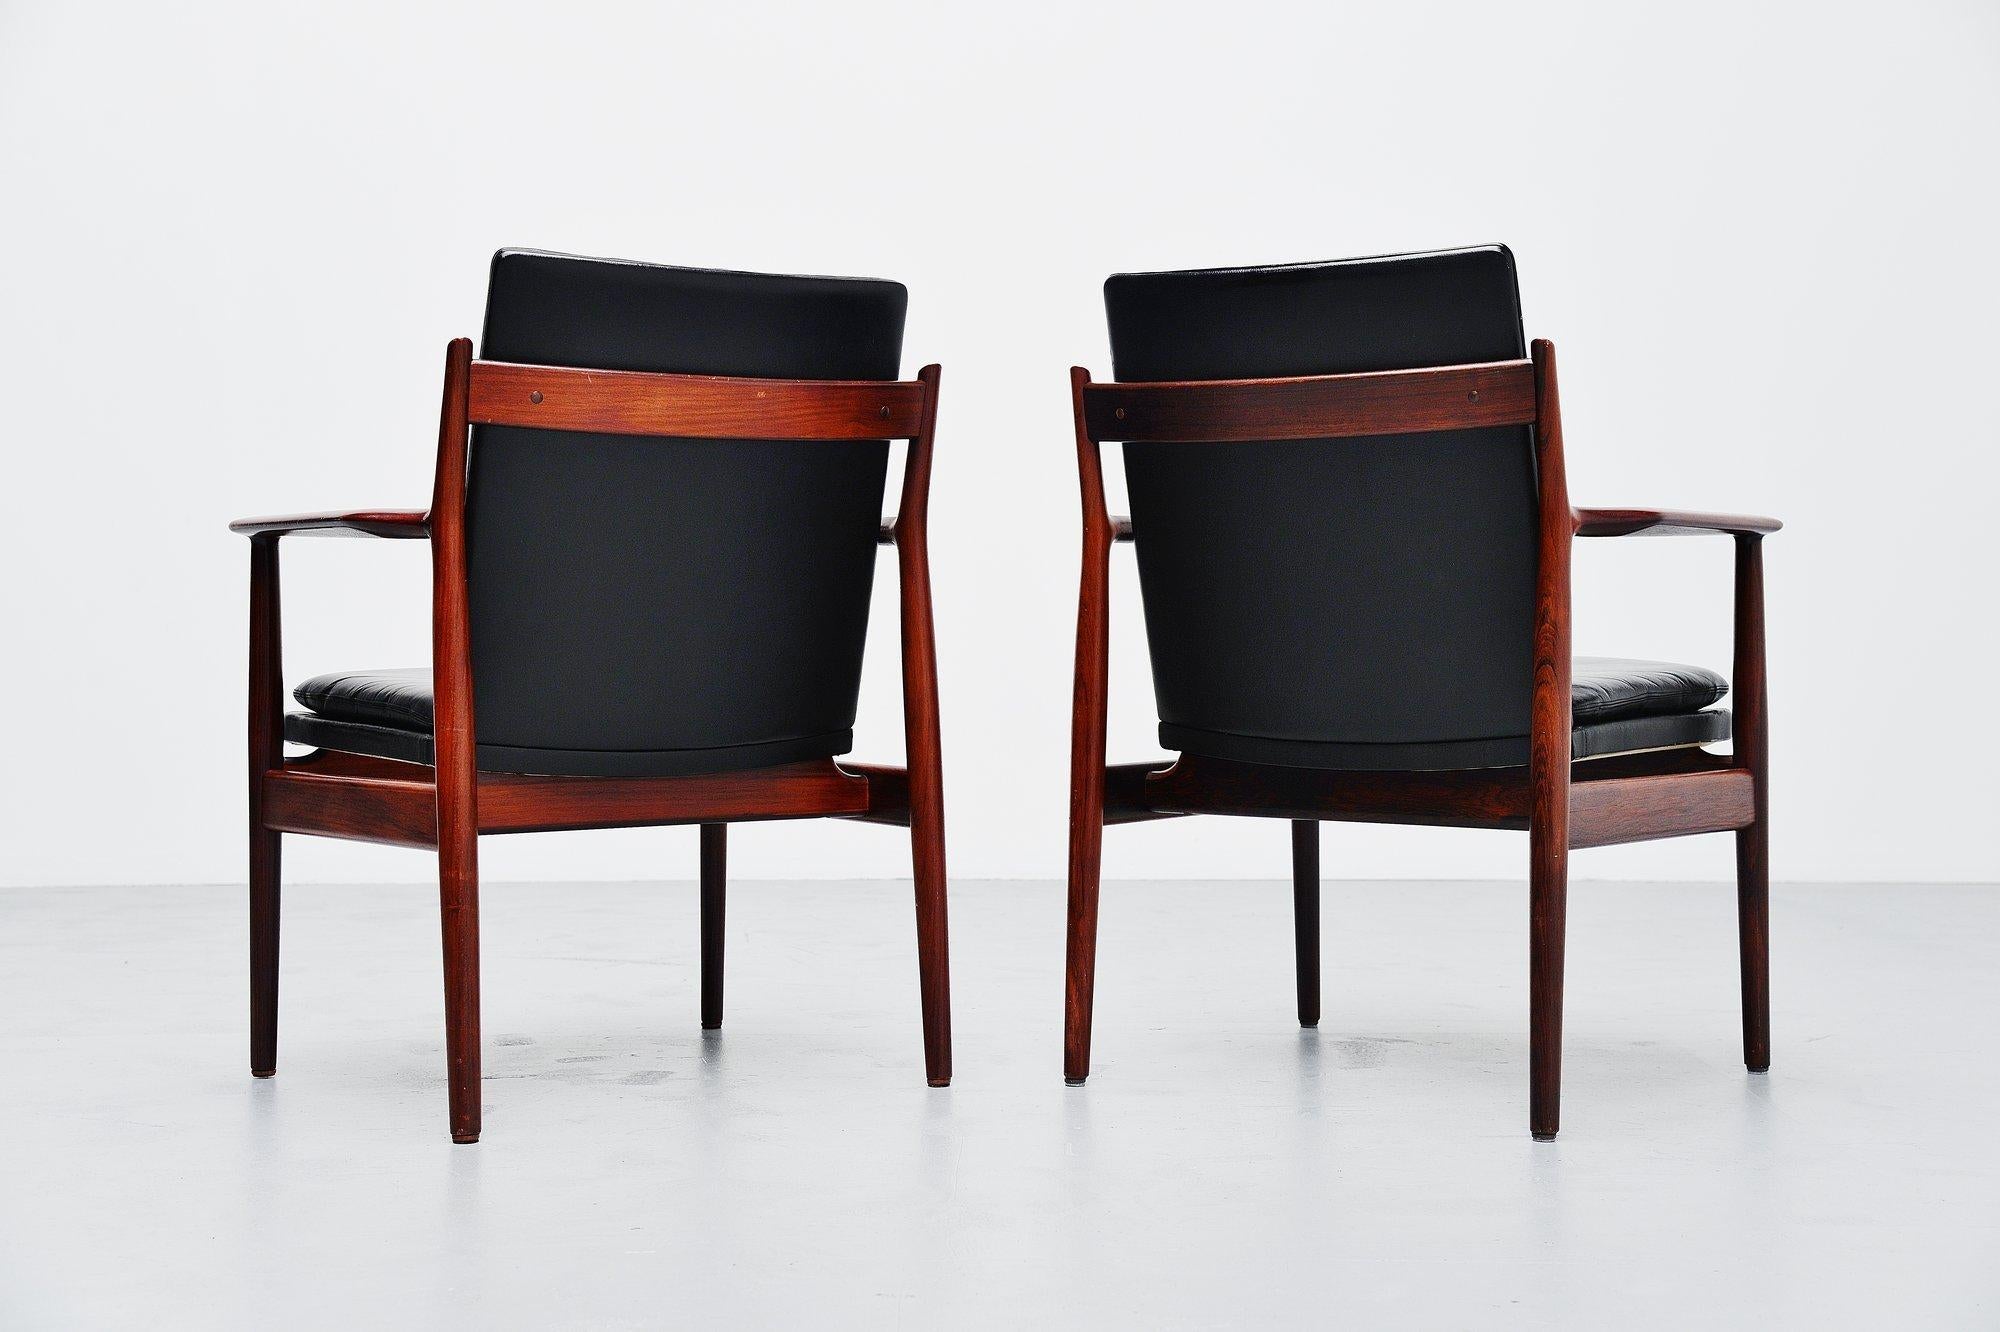 Nice pair of 431 armchairs designed by Arne Vodder and manufactured by Sibast Mobler, Denmark 1960. The chairs have a solid rosewood frame and black leather upholstery. The upholstery is still original and in very good condition. One chair looks